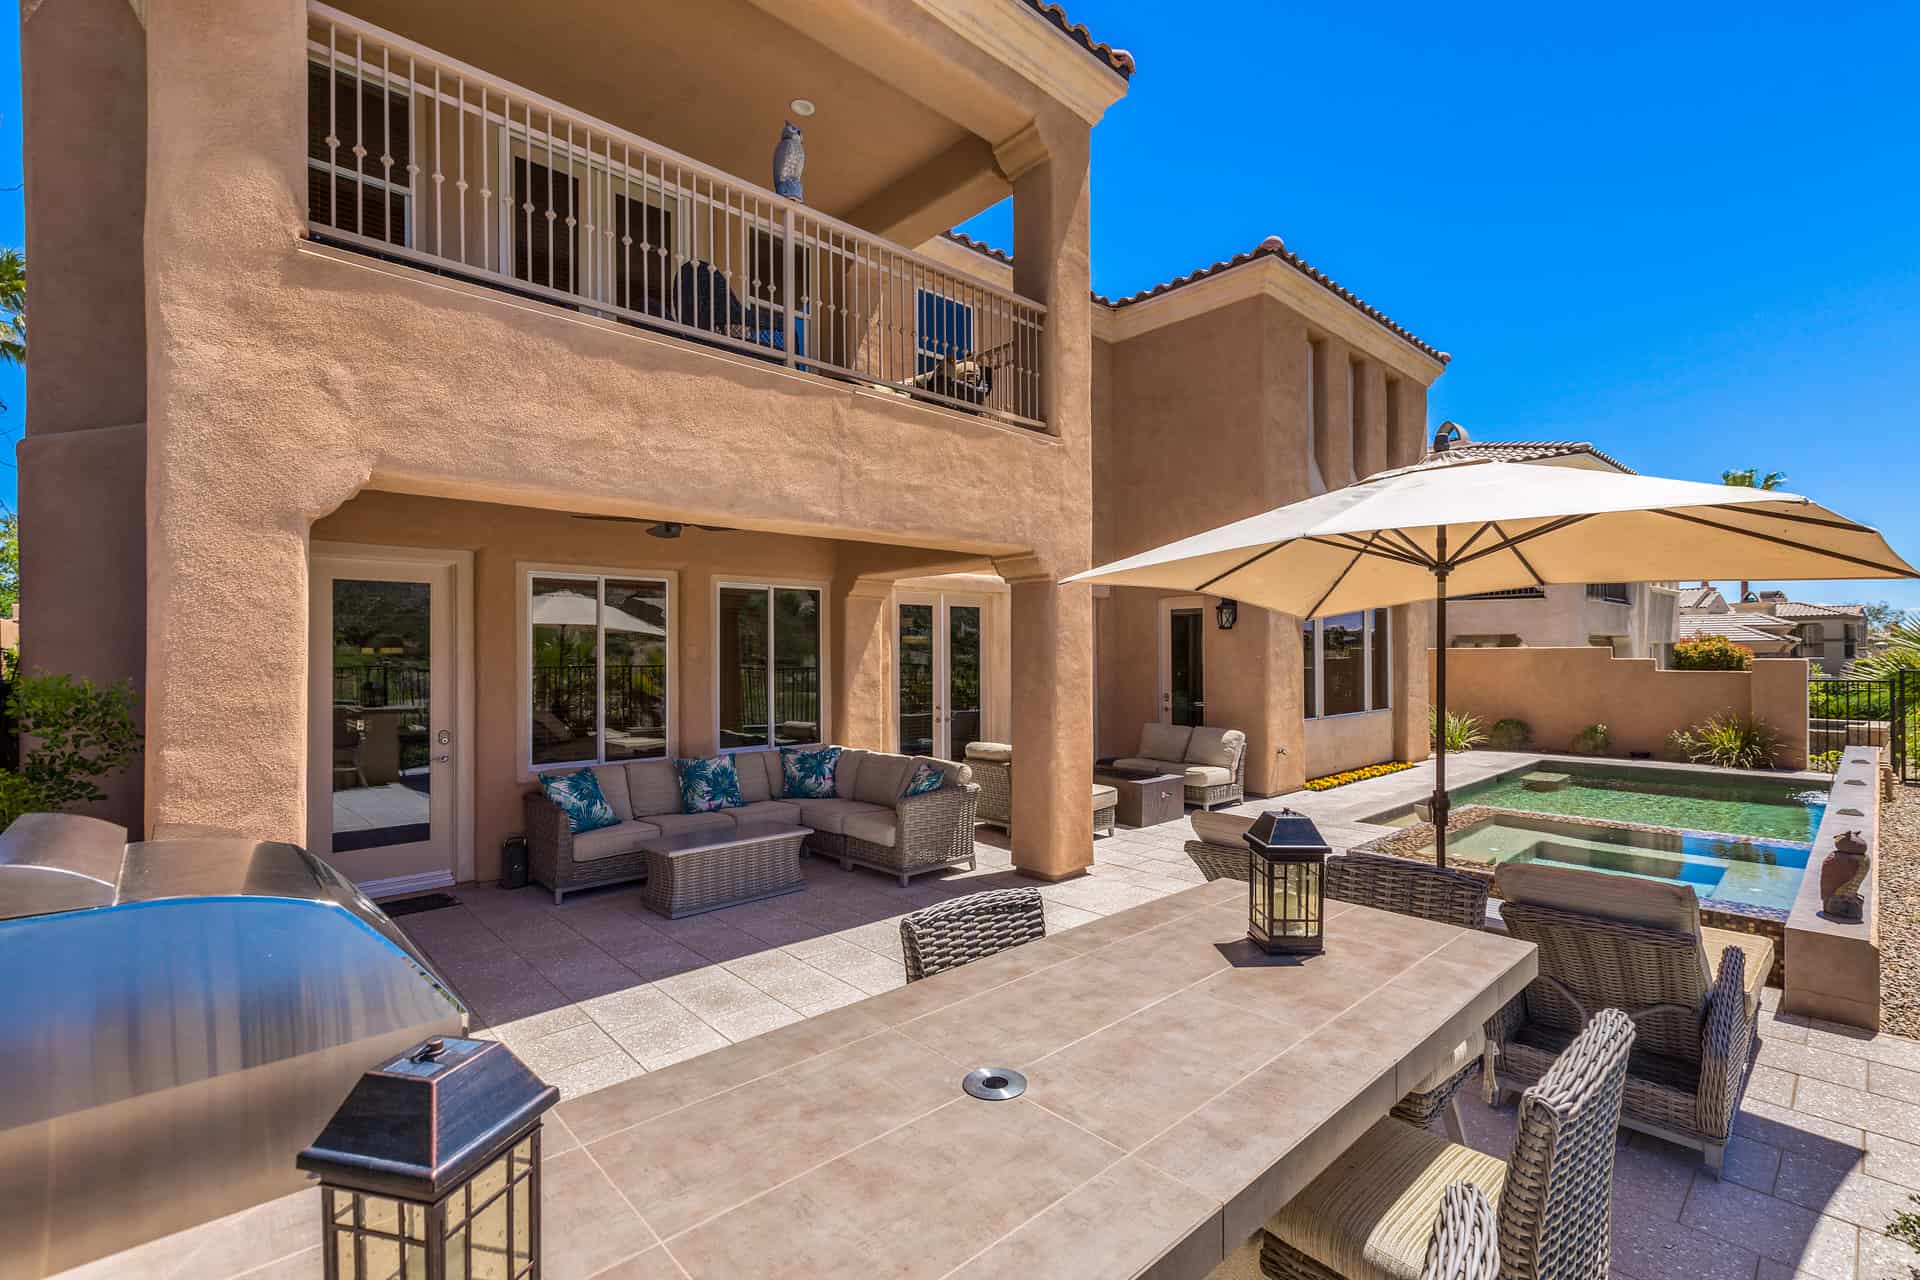 las-vegas-luxry-real-estate-realtor-rob-jensen-company-2615-grassy-spring-place-red-rock-country-club52